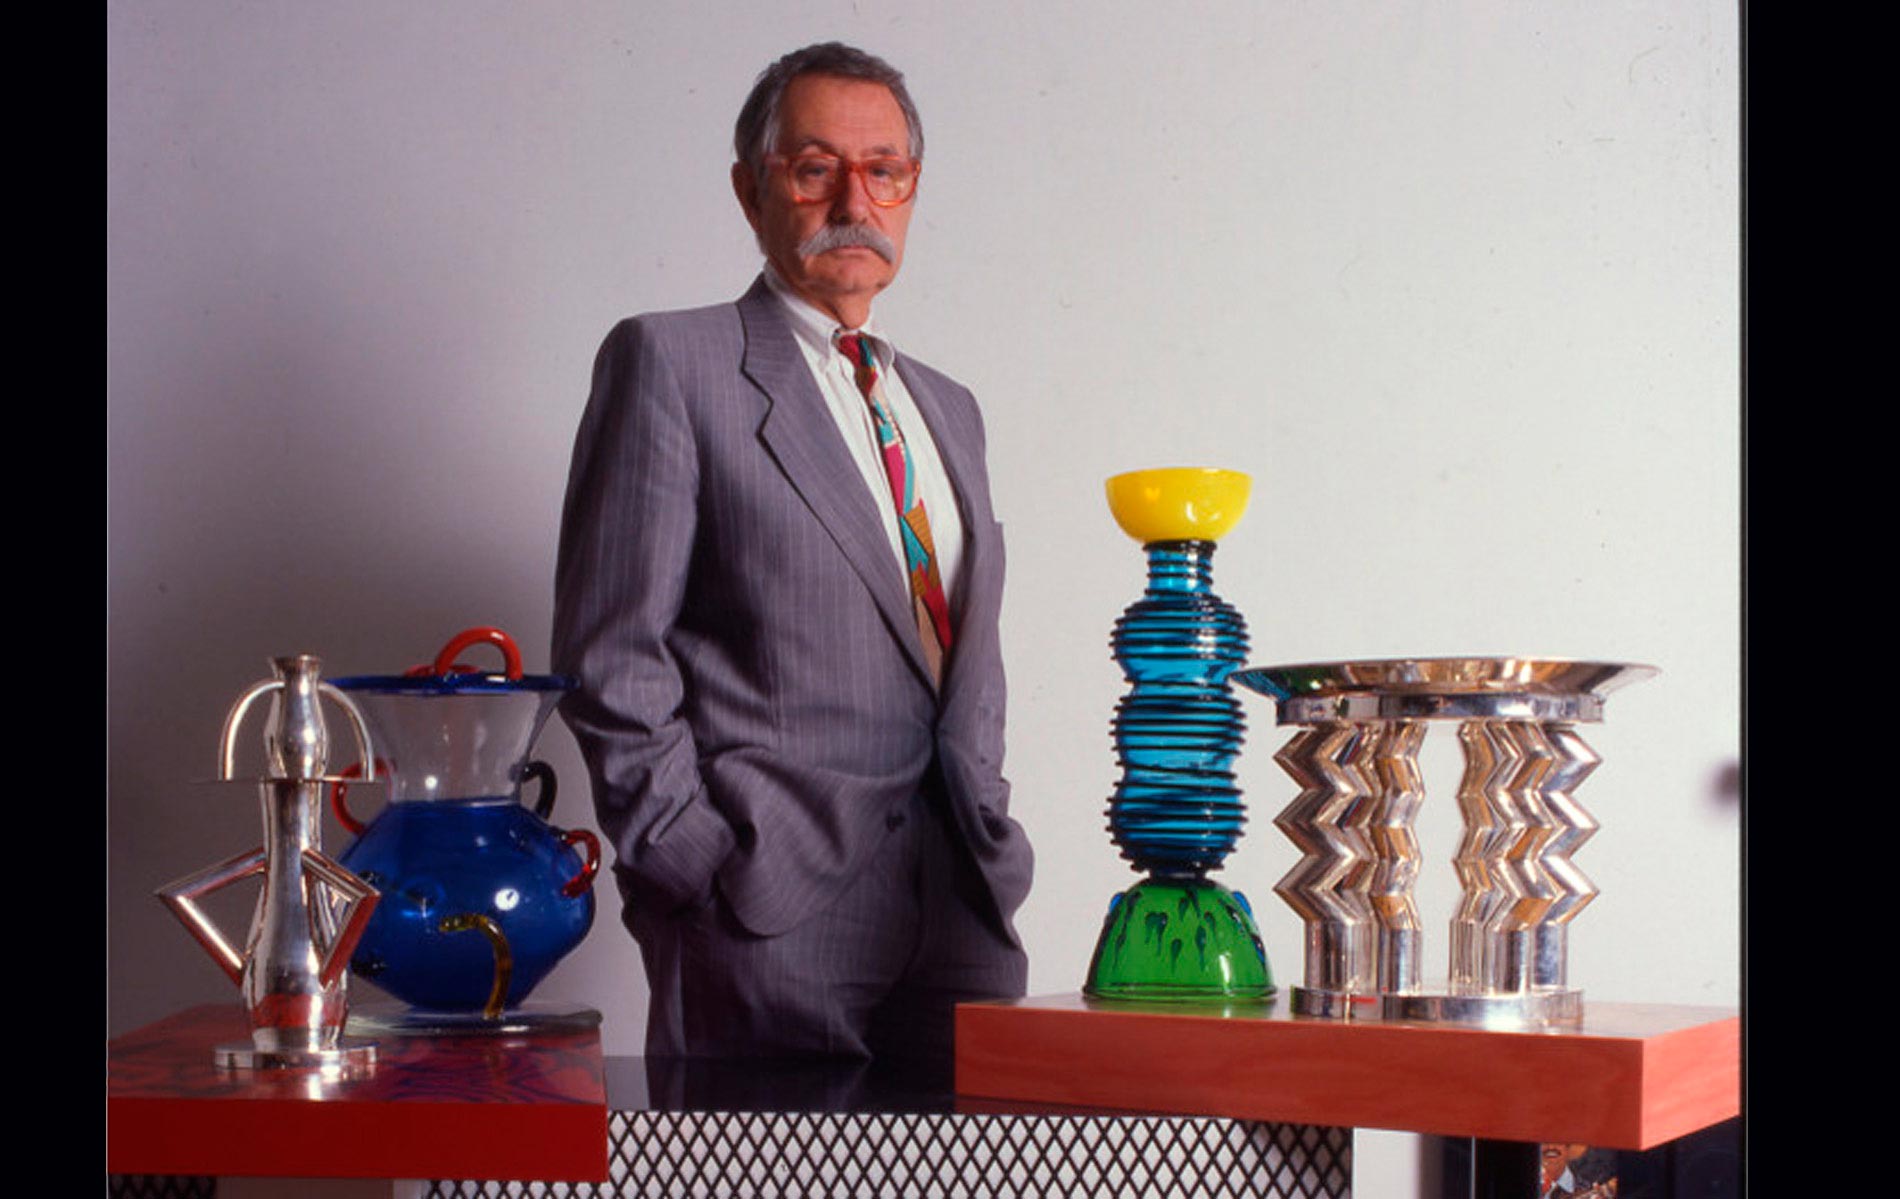 Ettore SOTTSASS - for "AD-Architectural Digest" Magazine